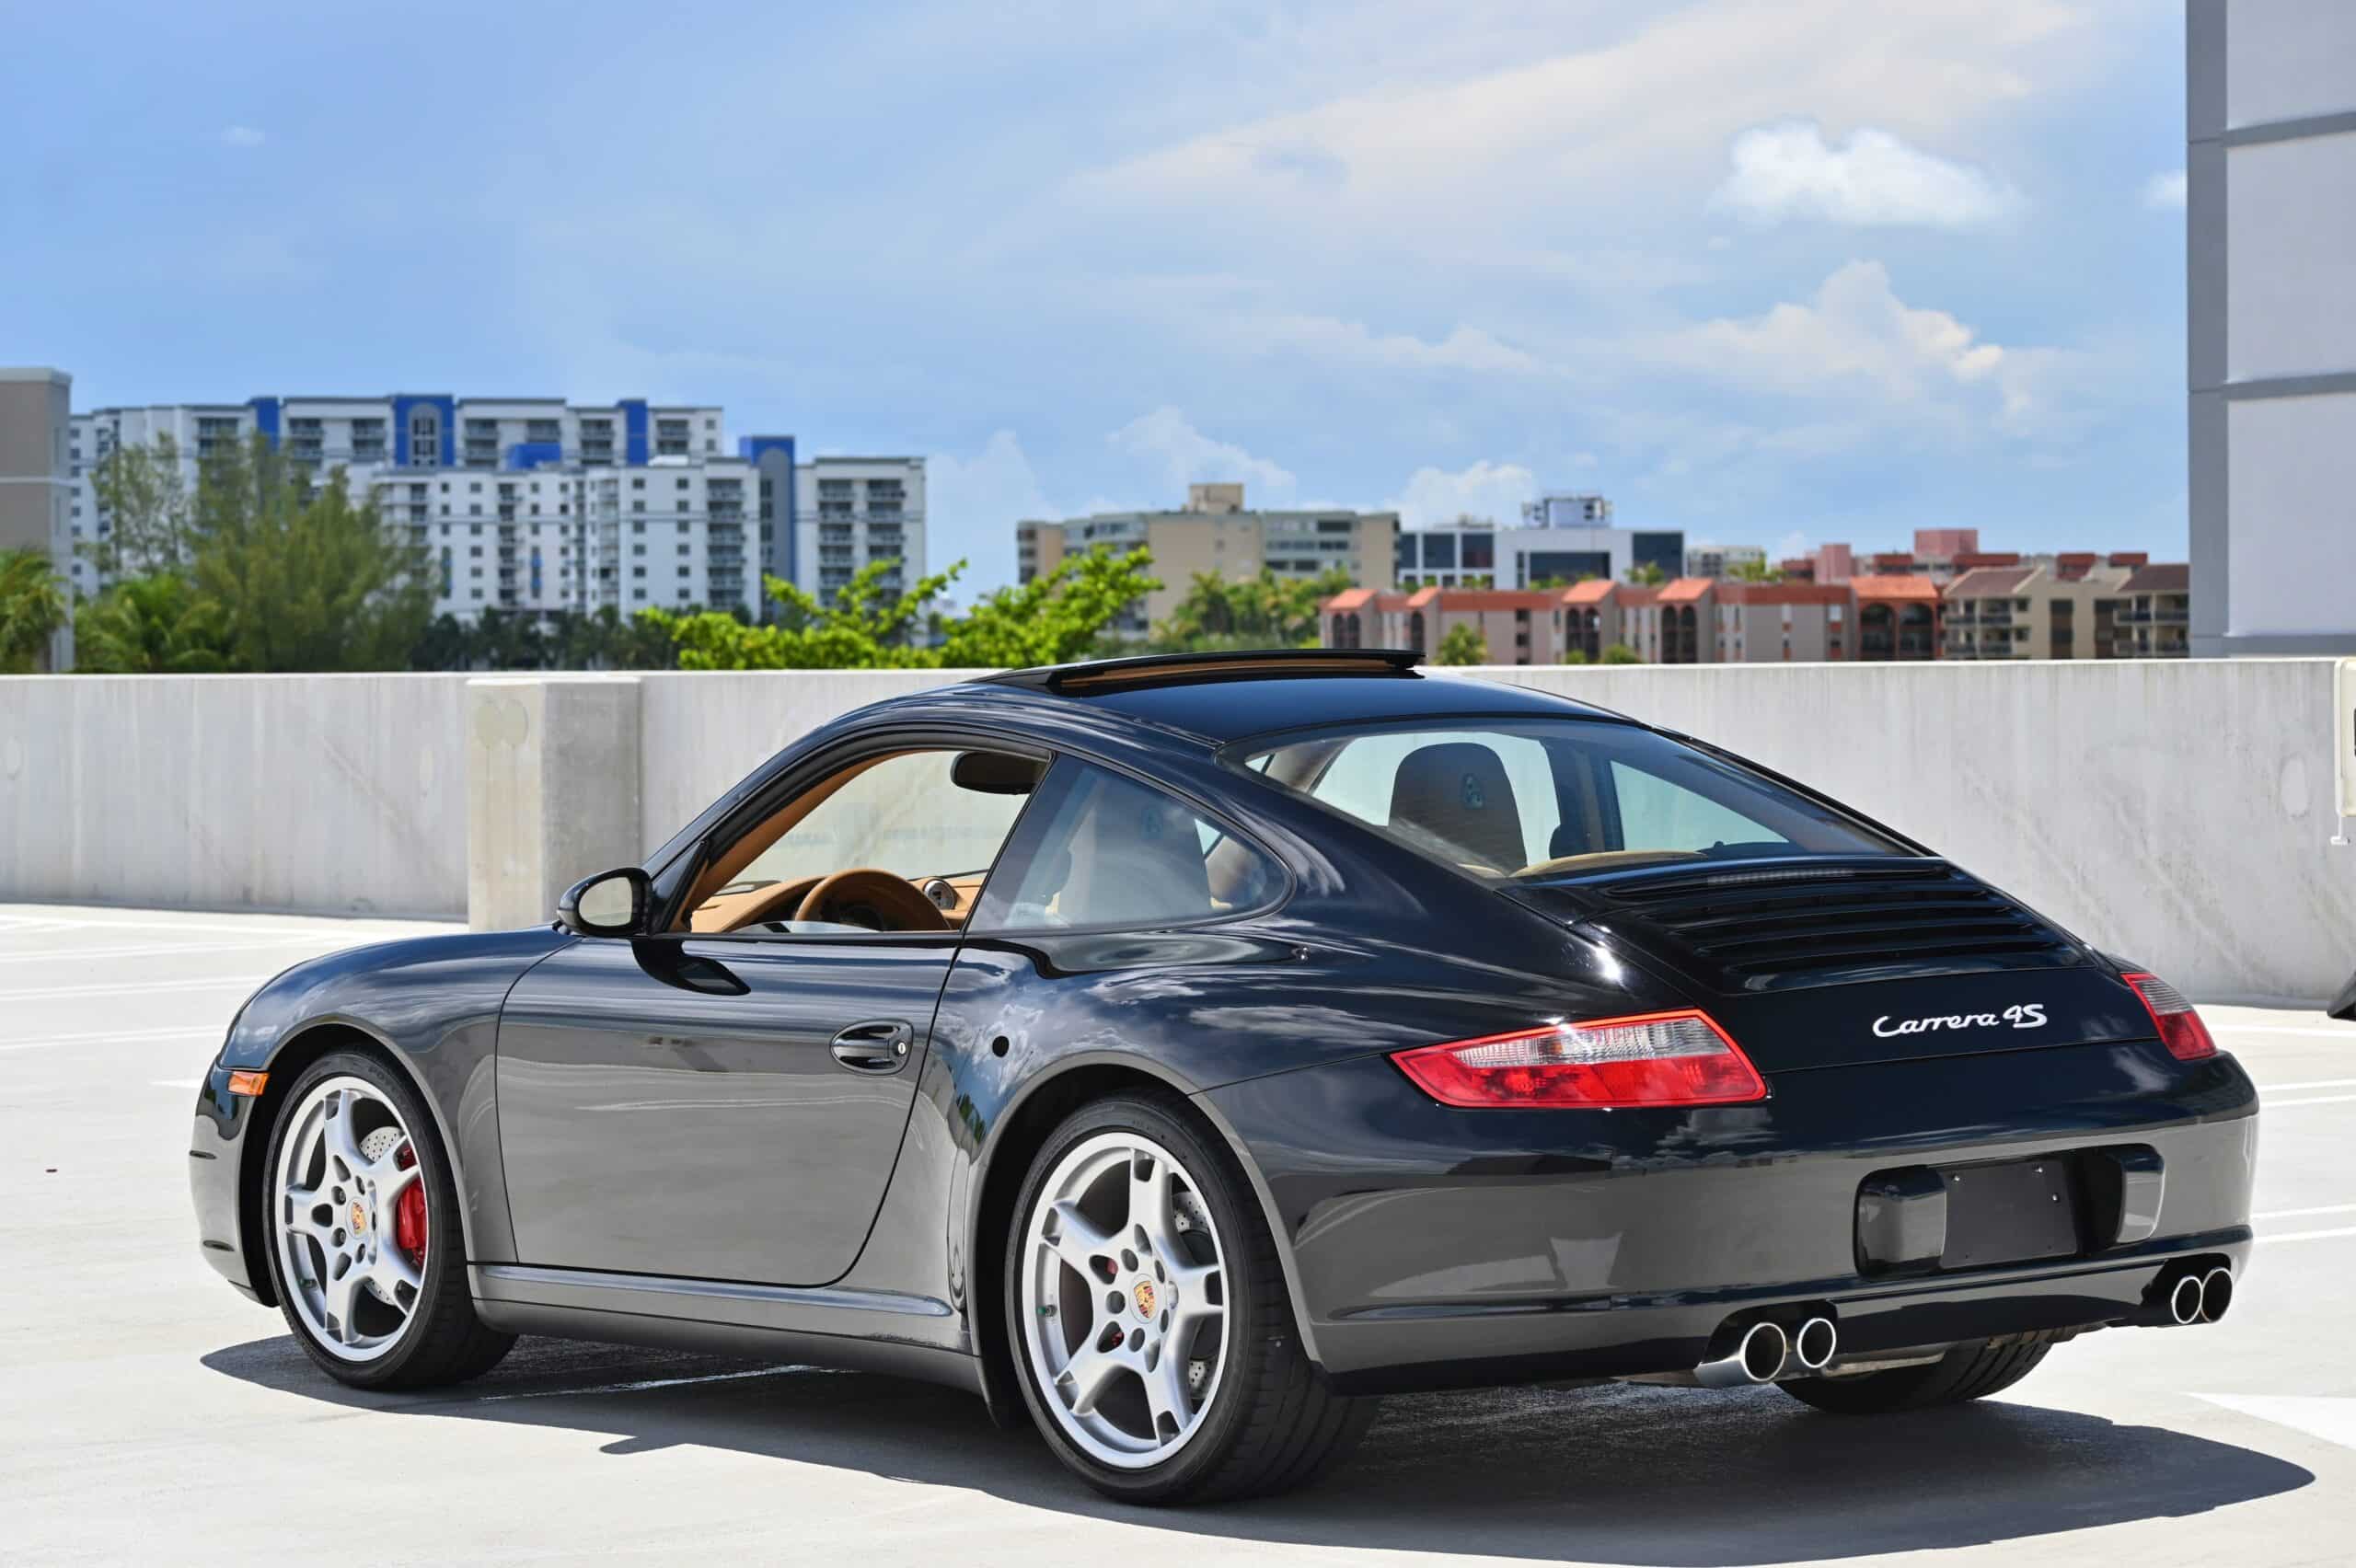 2006 Porsche 911 Carrera 4S 997 3.8L – 6 Speed Manual – Factory Widebody Turbo Look – Only 43K Miles – Like NEW